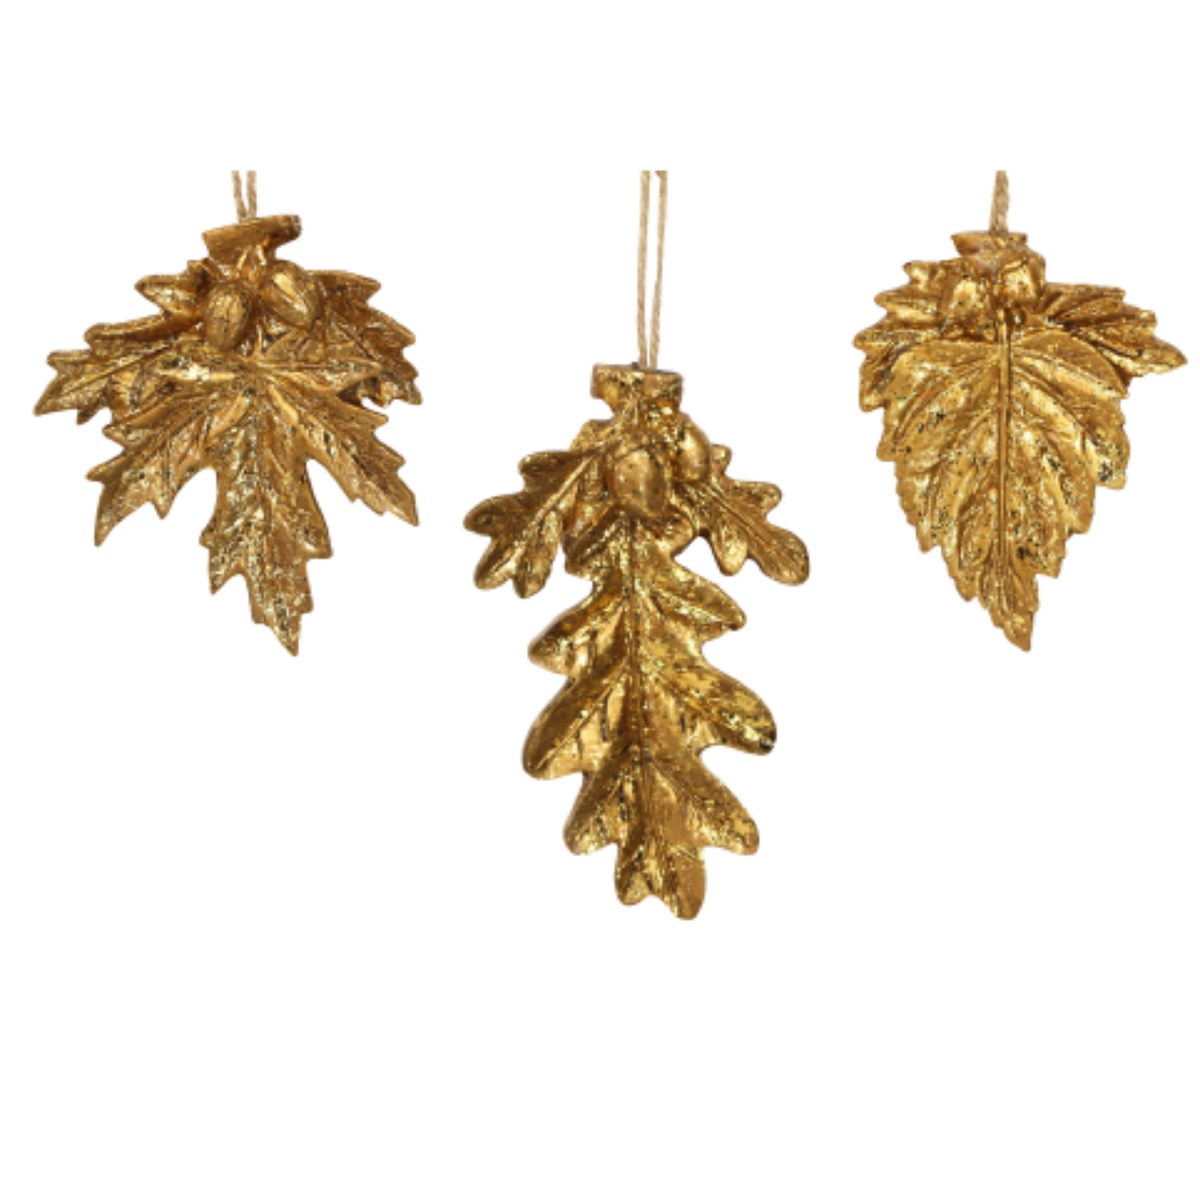 Gold leaf resin hanging Christmas decoration. By Gisela Graham. The perfect festive addition to your home.